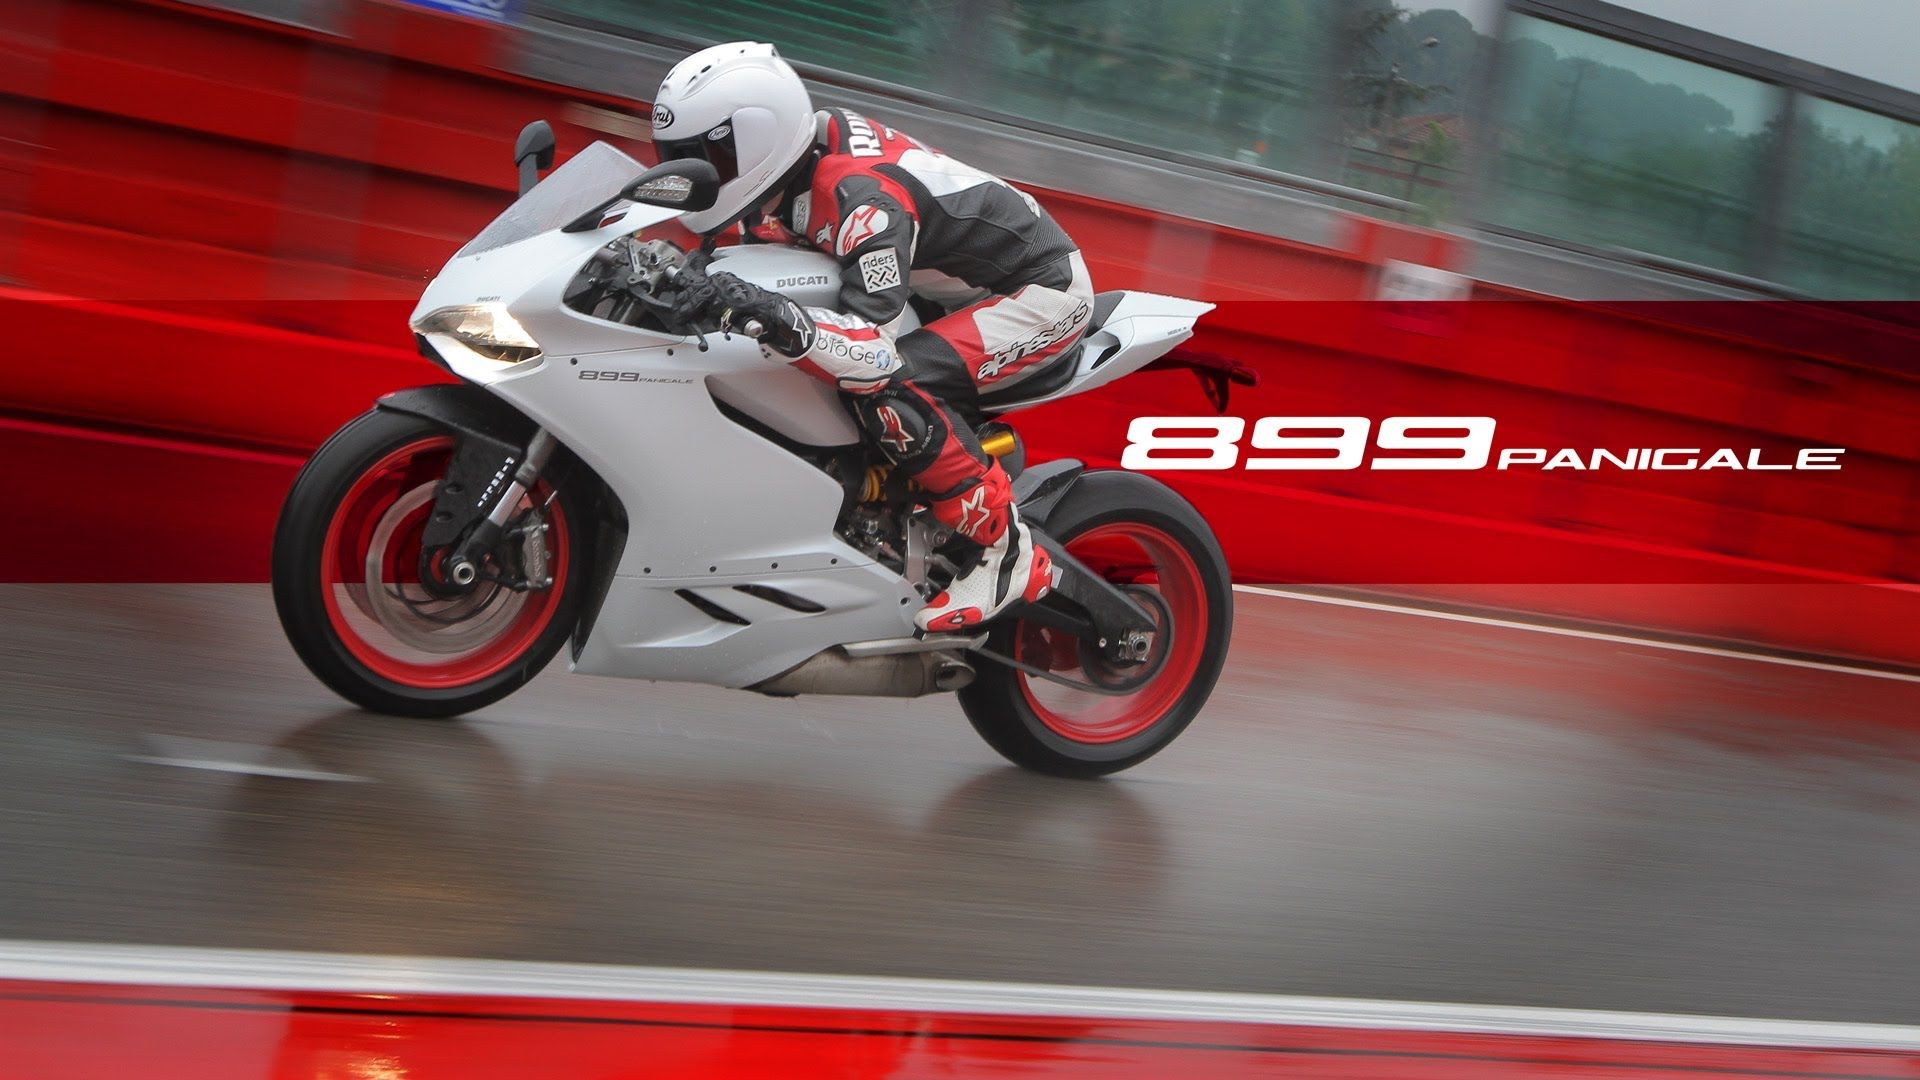 AWESOME Ducati 899 Panigale REVIEWED!